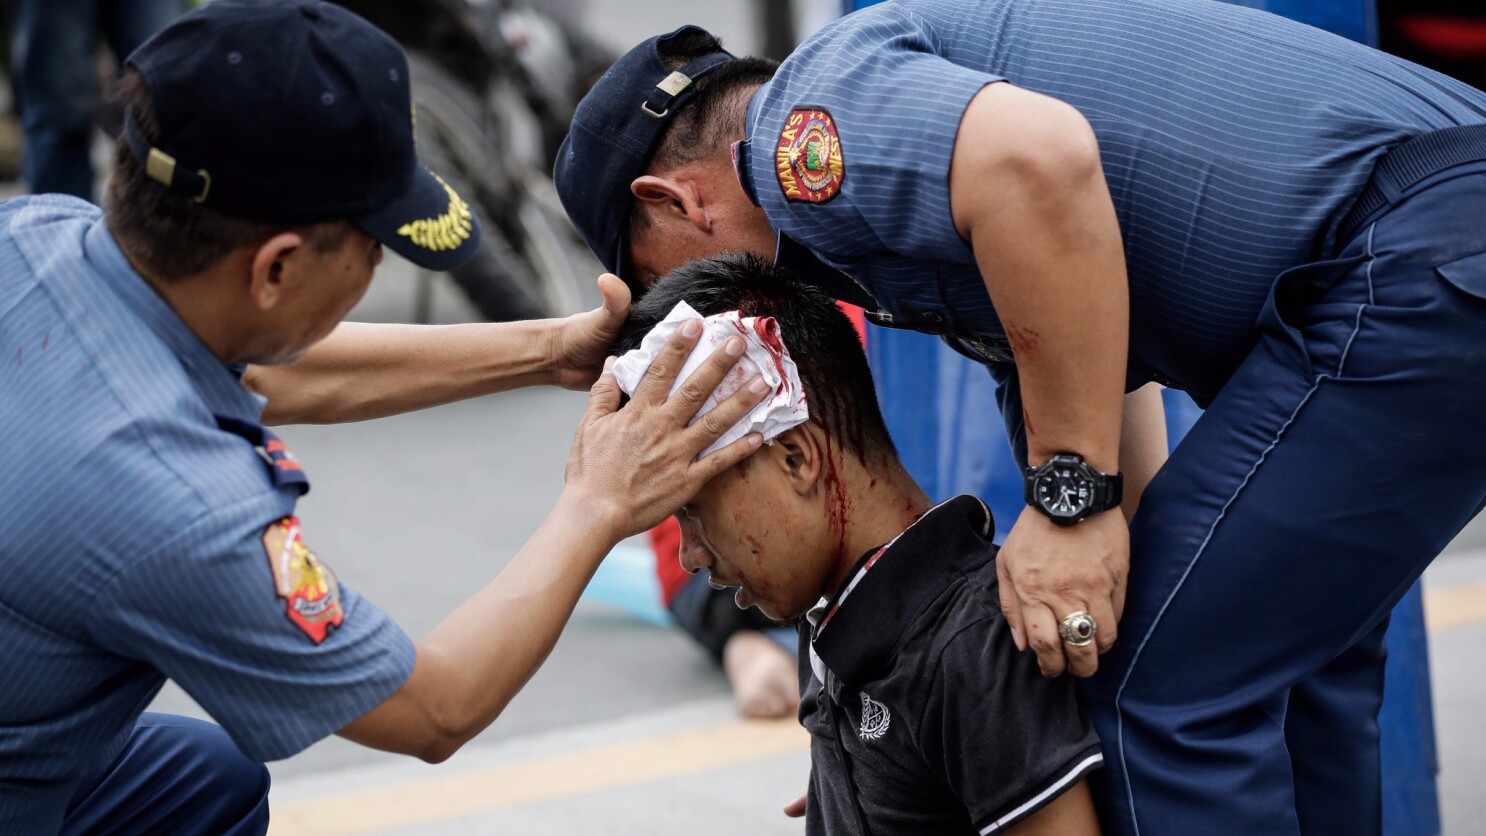 Police vehicle rams protesters at anti-U.S. rally in the Philippines: 'No  justification for it' - Los Angeles Times